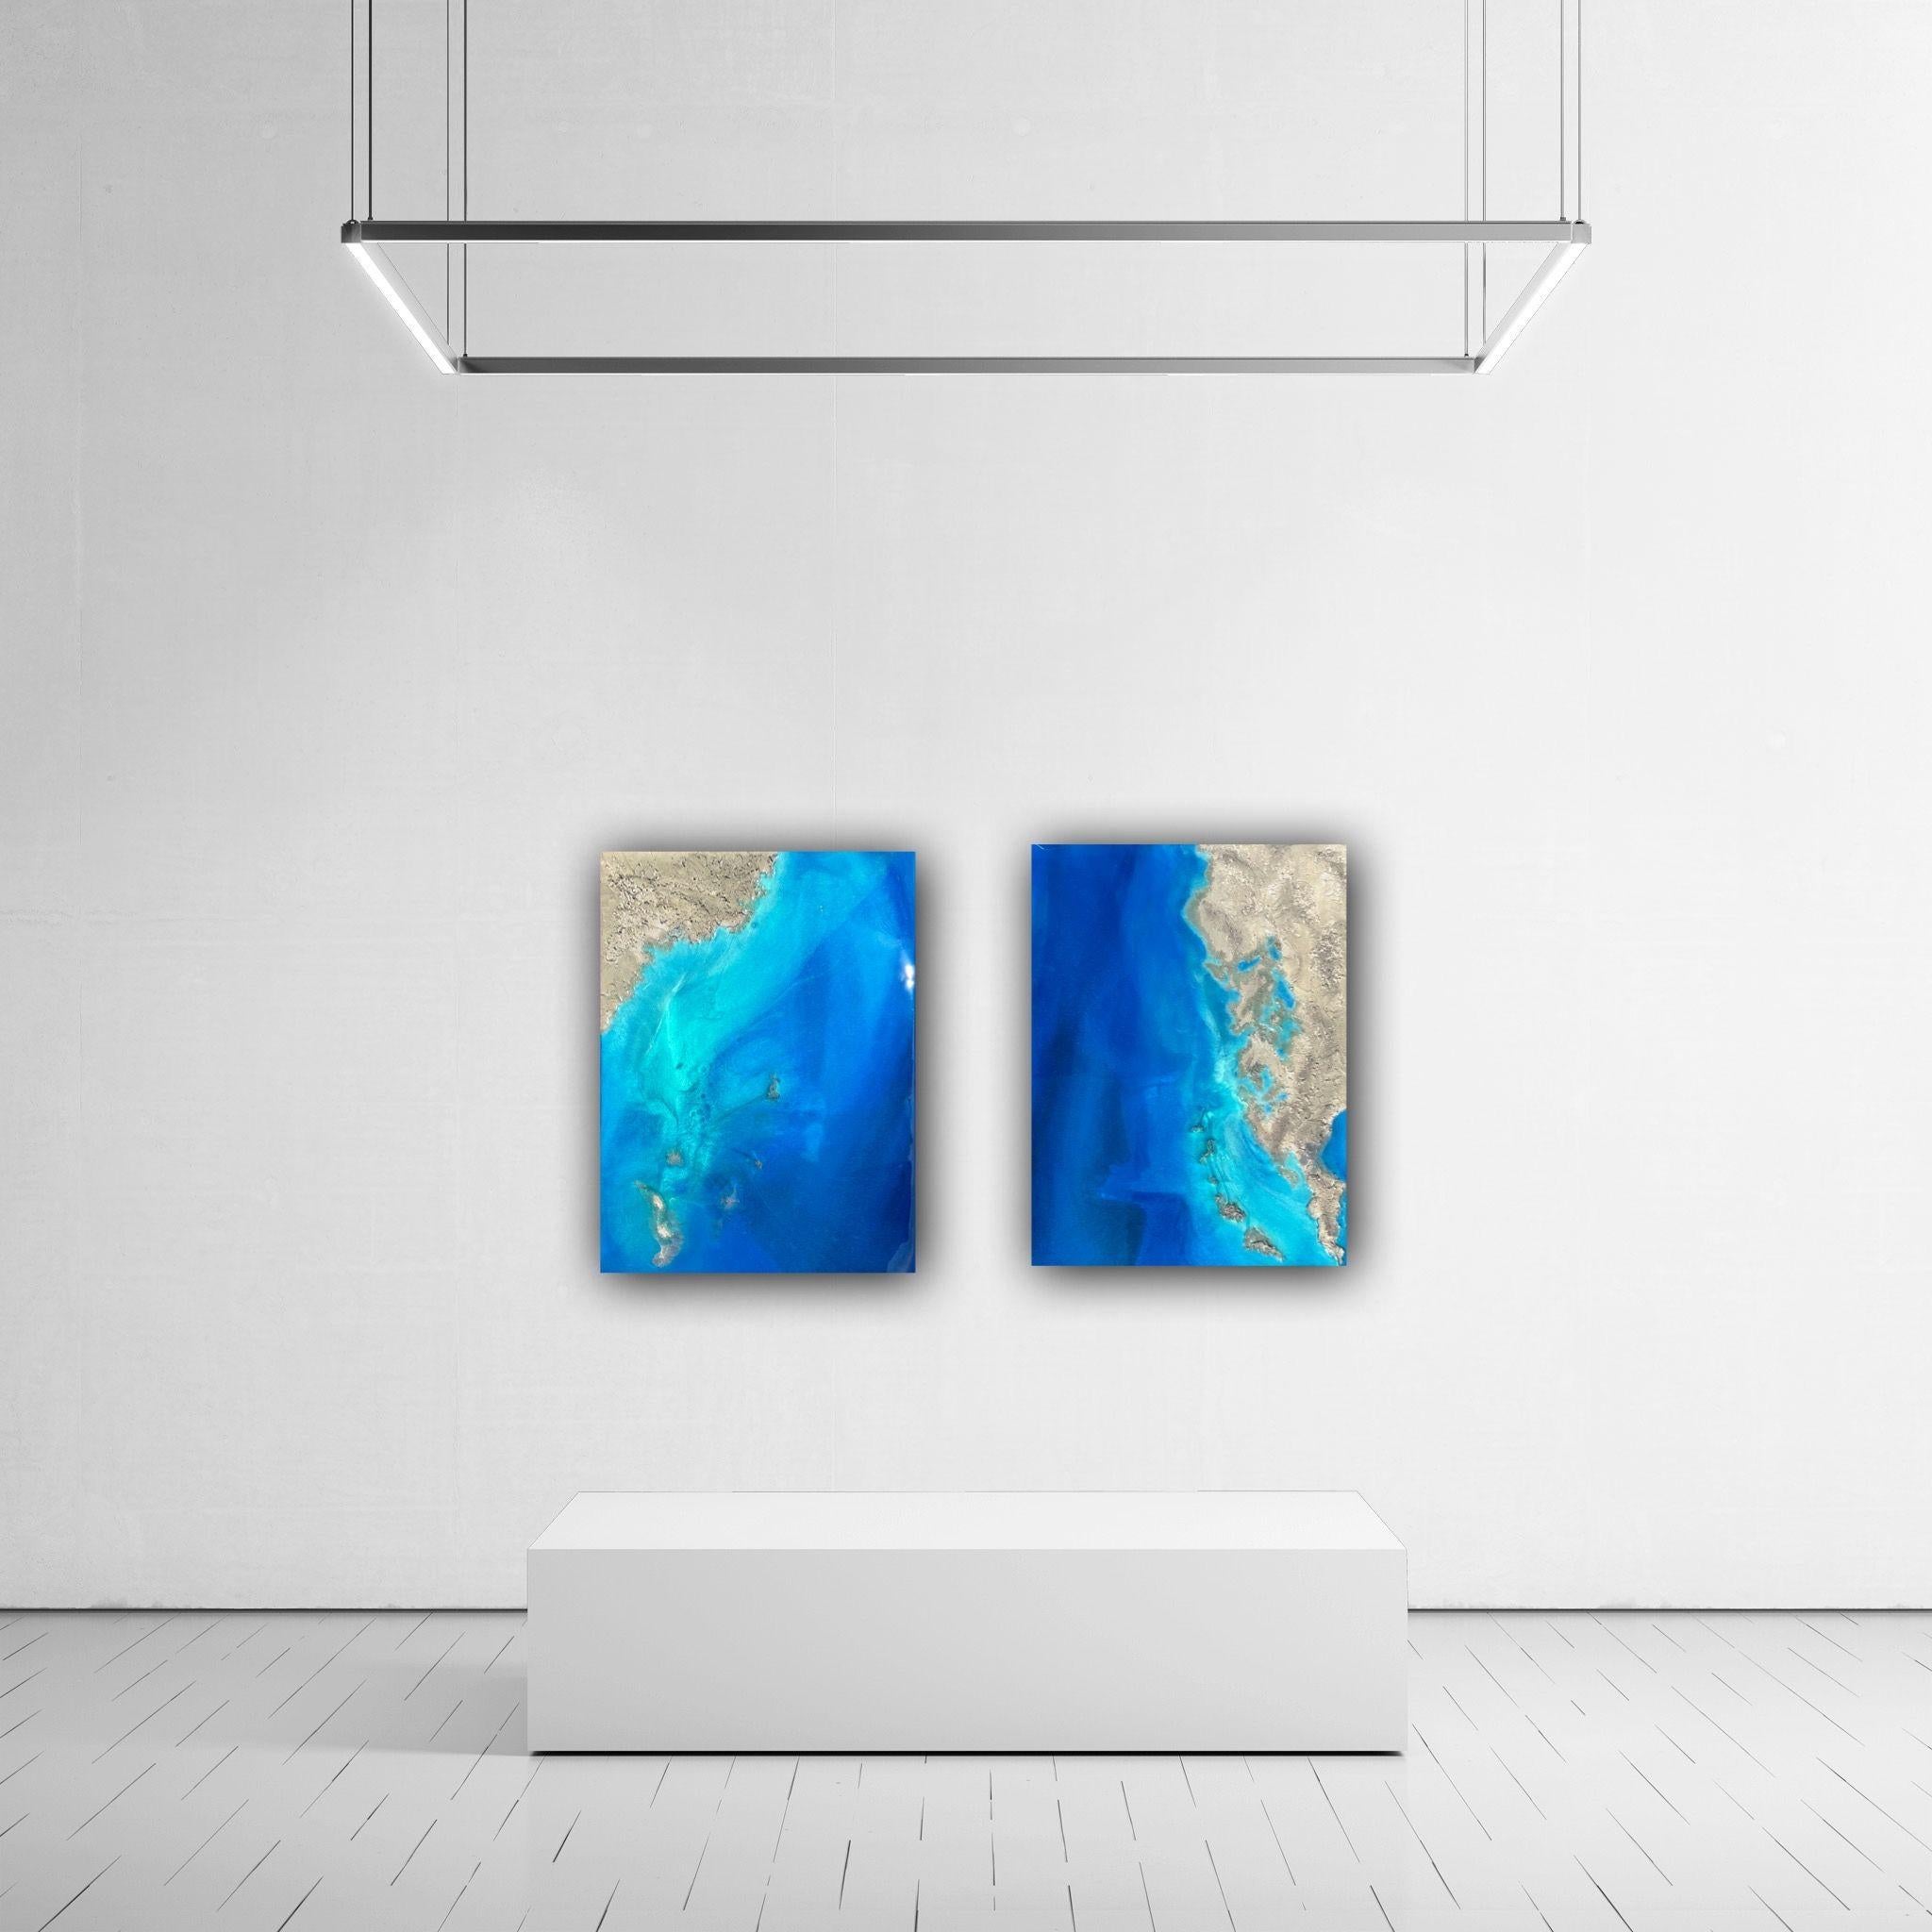 Unique original aerial ocean painting with white sand beach and frothy splashing waves, inspired by The Australian Great Barrier Reef  Different shades of blue, turquoise, teal, aqua, and beige  This painting does not need to be framed, the painted